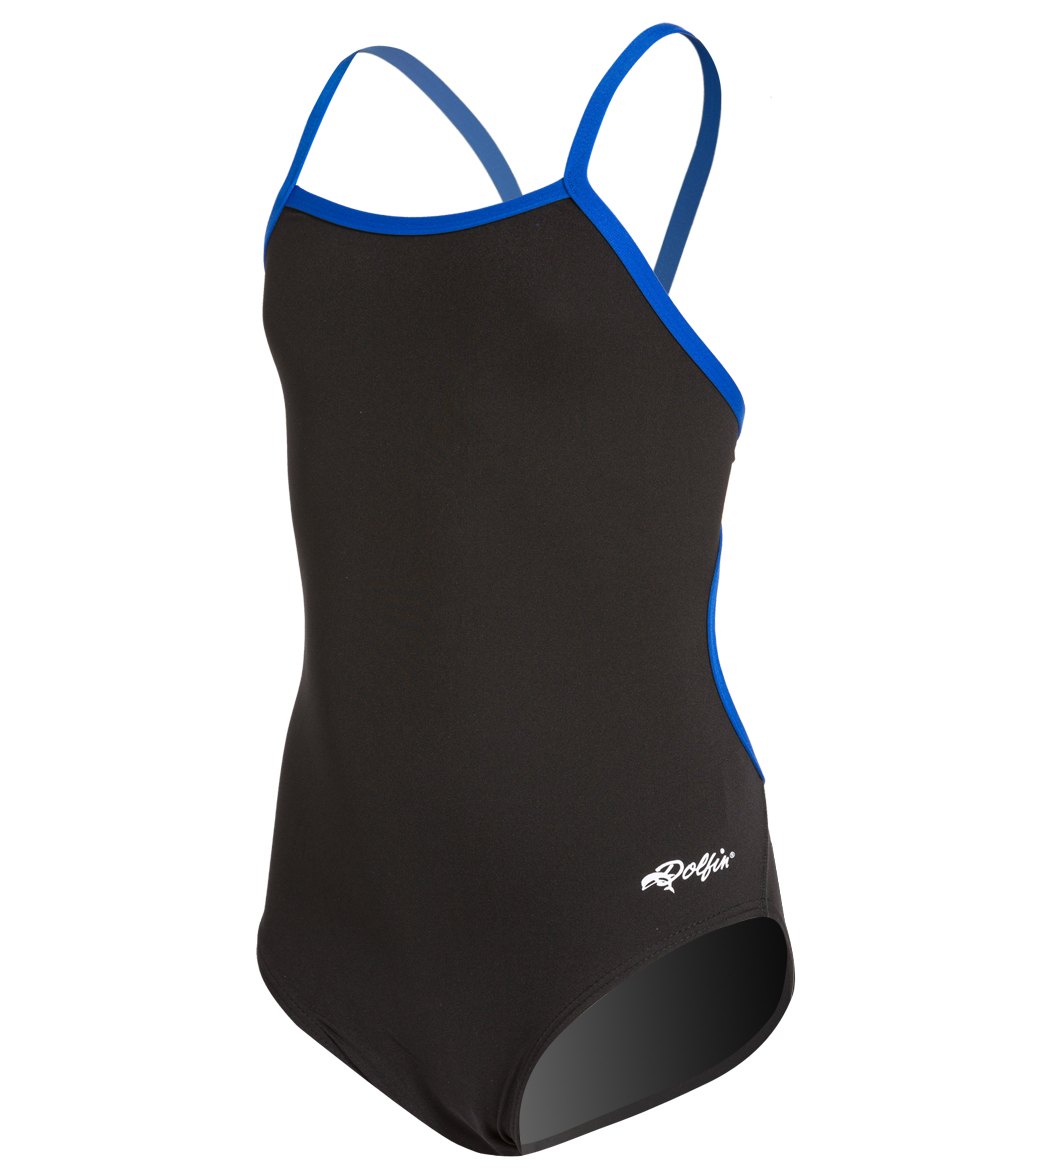 Dolfin Girls' All Poly Varsity Solid String Back One Piece Swimsuit - Black/Royal 22 Polyester - Swimoutlet.com